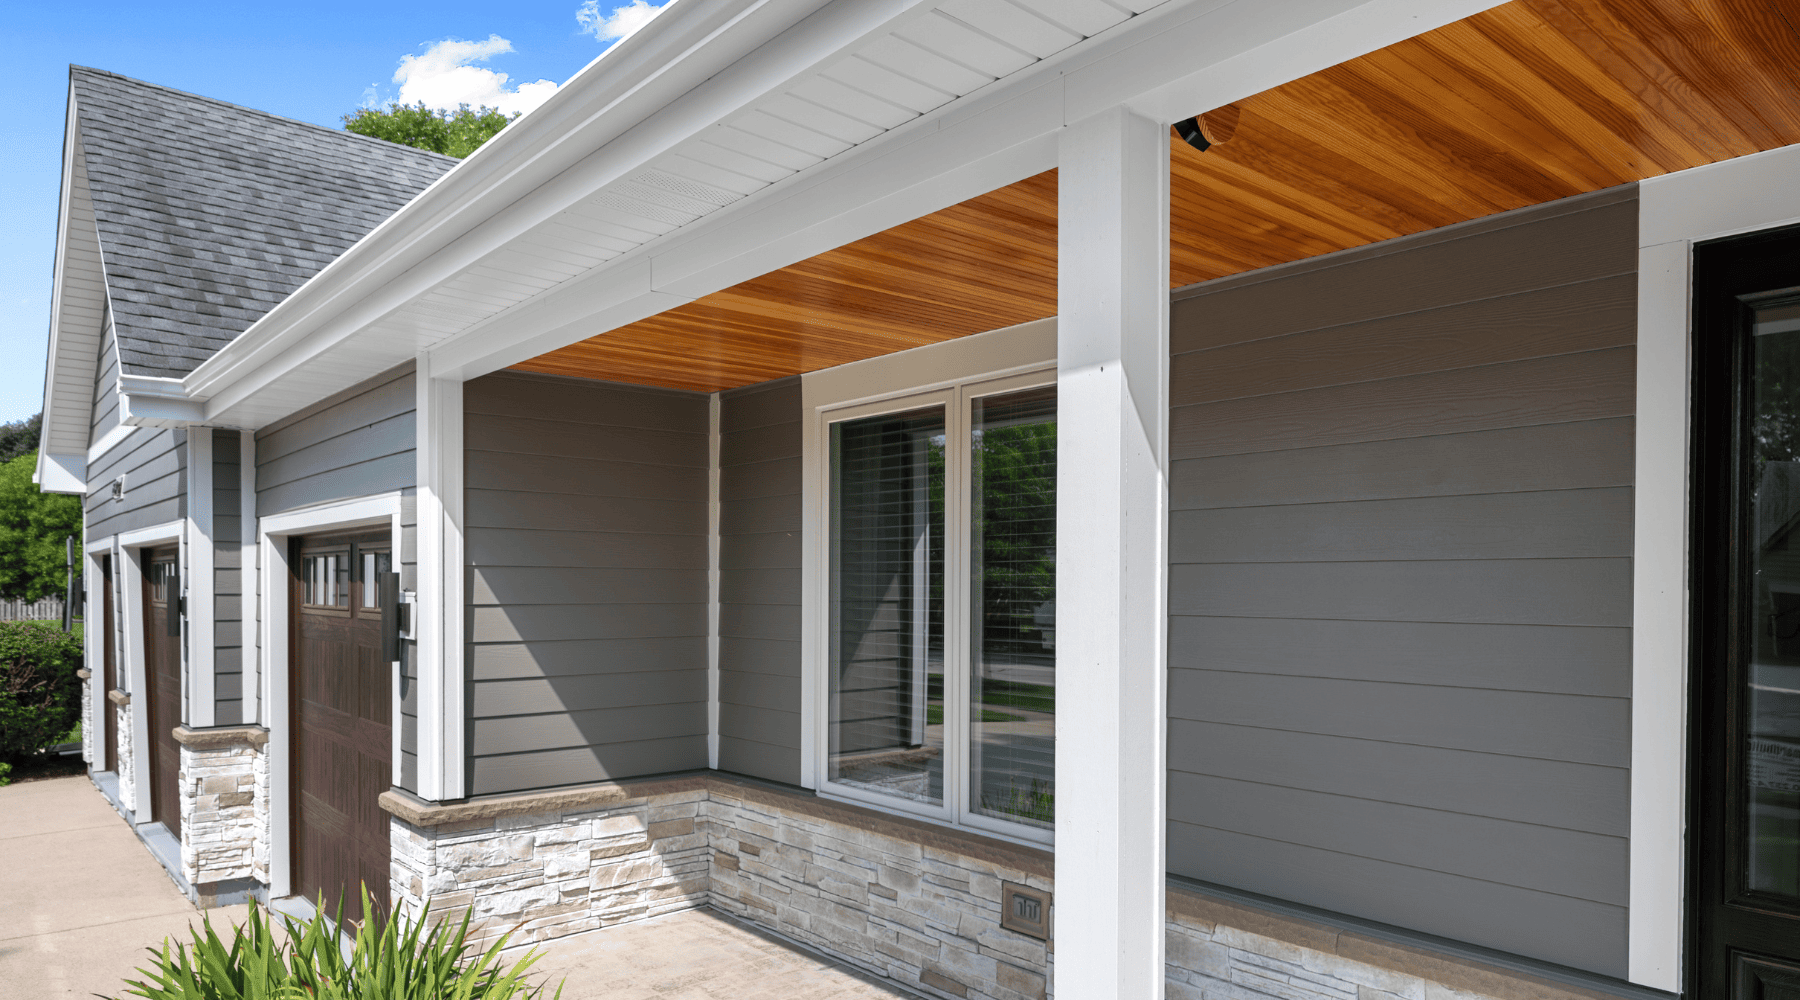 exterior of remodeled naperville home with covered porch and wooden porch ceiling